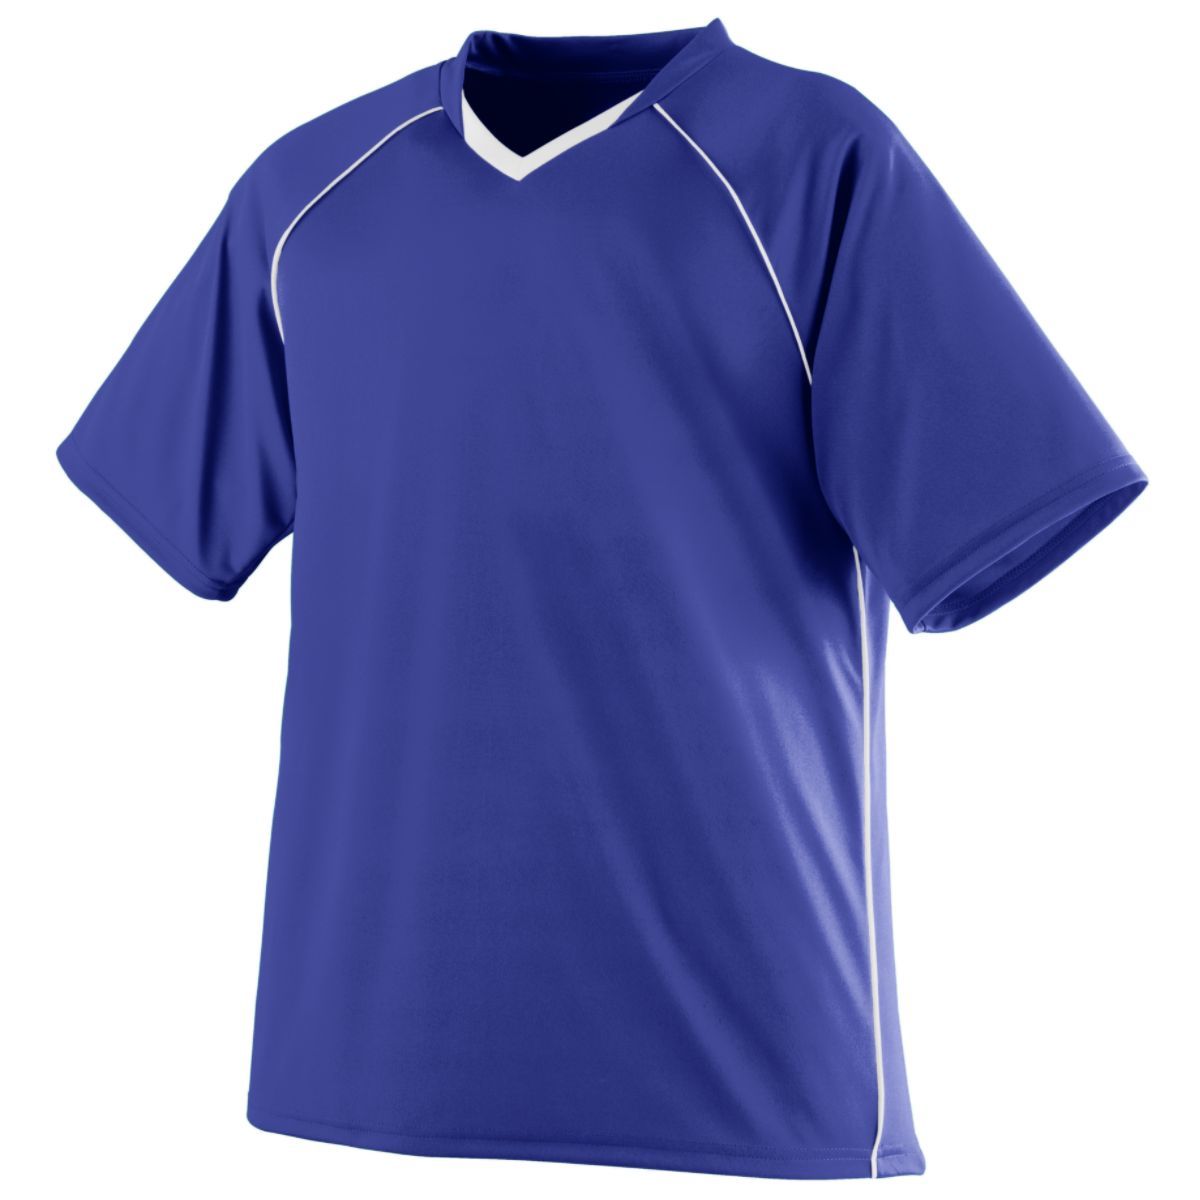 Augusta Sportswear Striker Jersey in Purple/White  -Part of the Adult, Adult-Jersey, Augusta-Products, Soccer, Shirts, All-Sports-1 product lines at KanaleyCreations.com